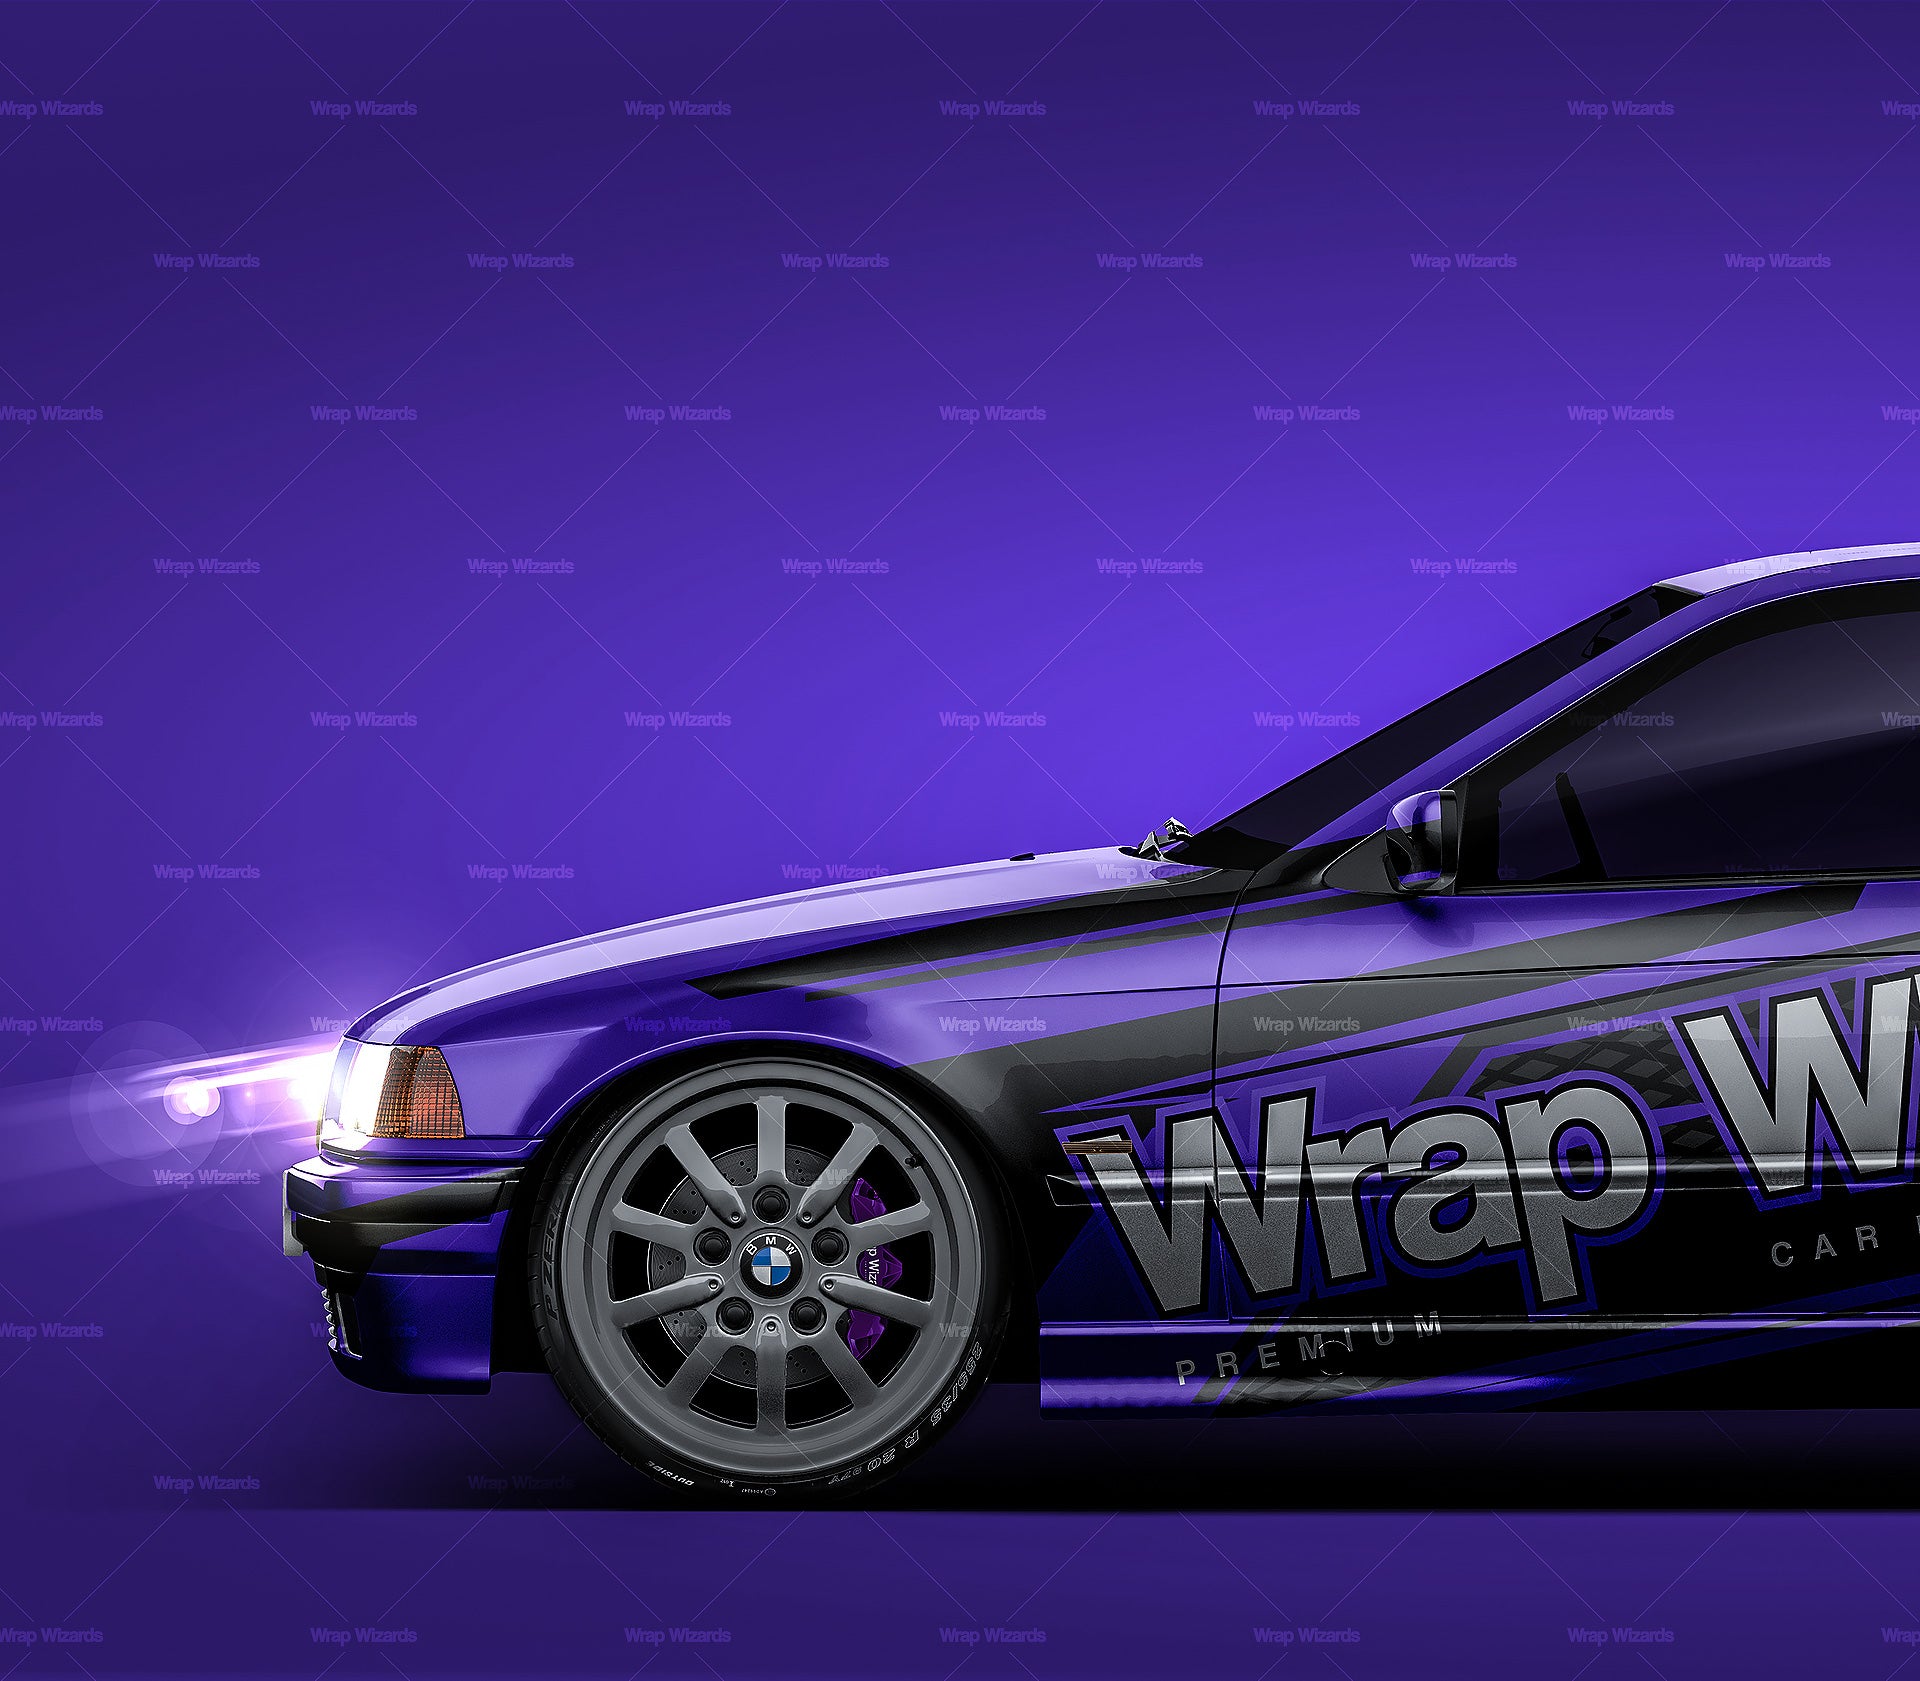 BMW Serie 3 e36 compact I glossy finish - all sides Car Mockup Template.psd